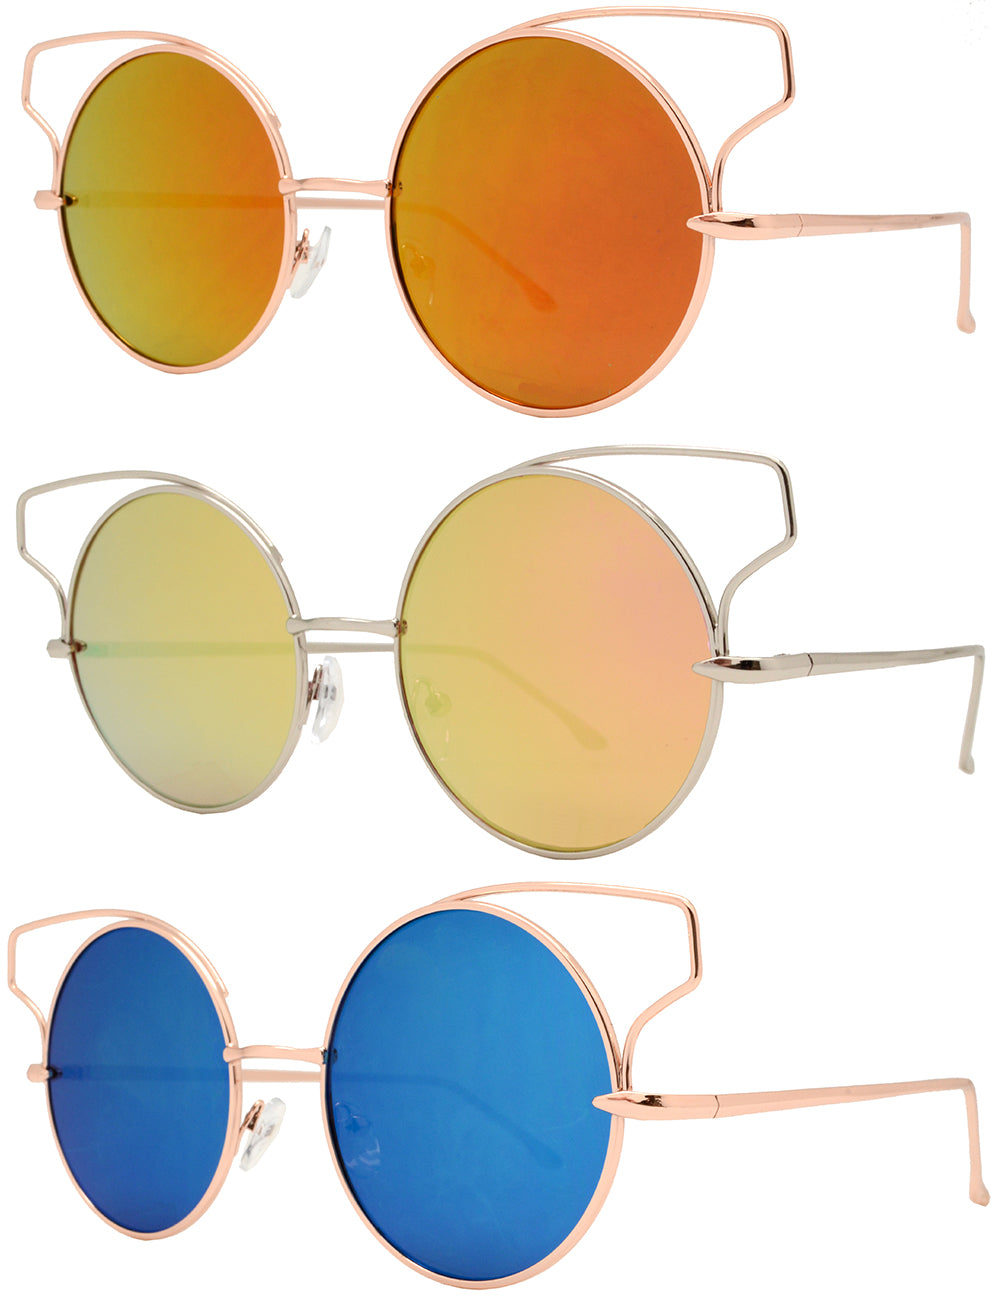 8592 - Round Metal Cut Out Frame Sunglasses with Color Mirror Lens